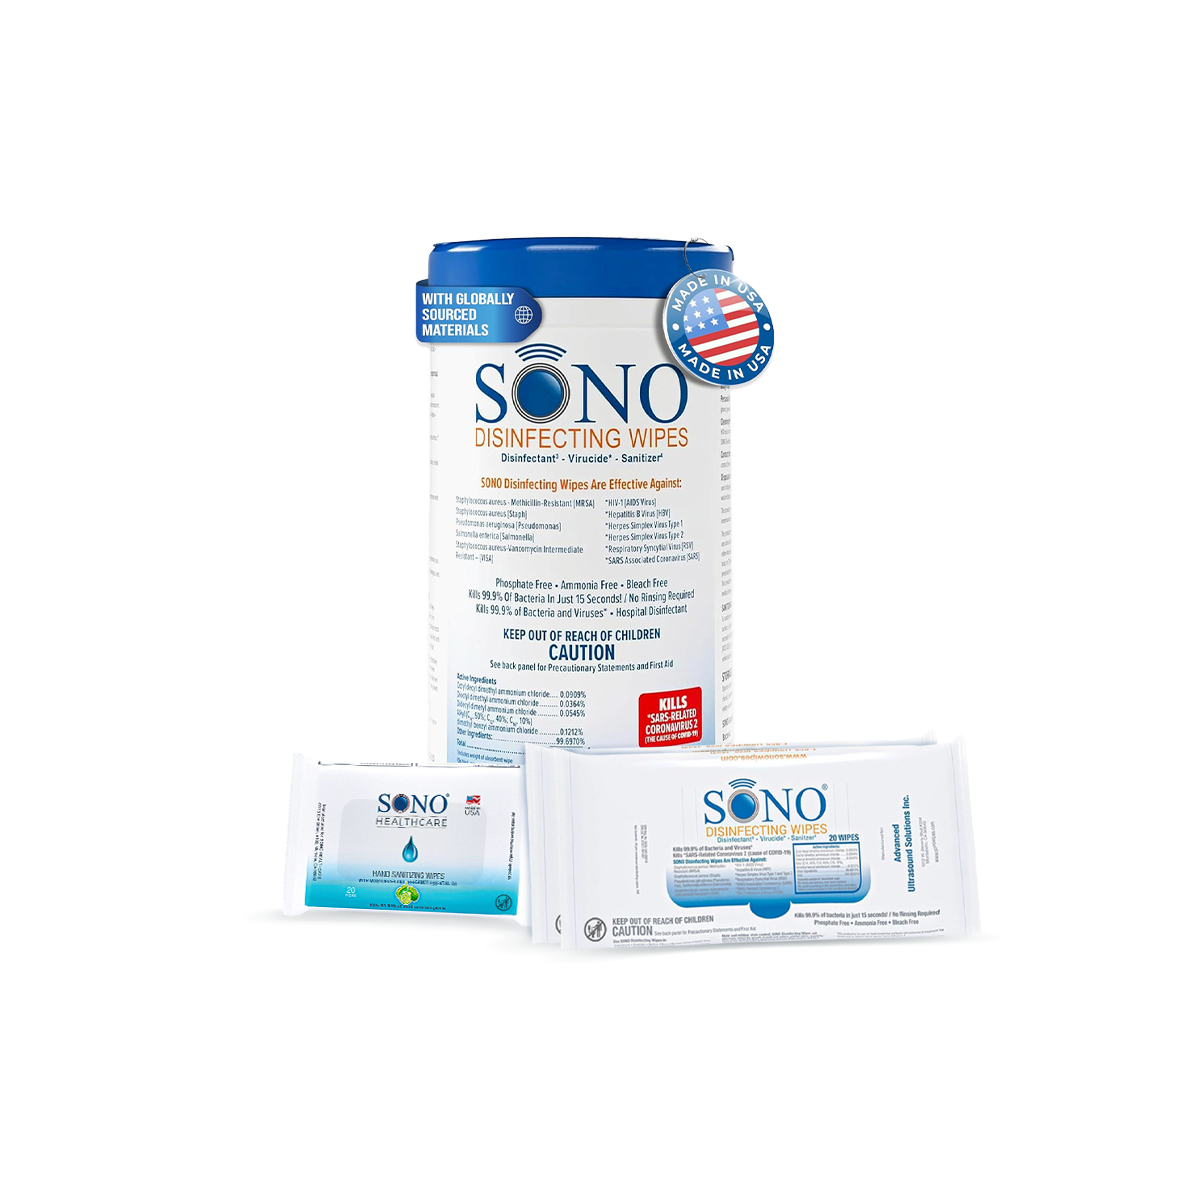 SONO Disinfecting Wipes Family Bundle featuring various pack sizes for home and travel use, displayed against a clean background.